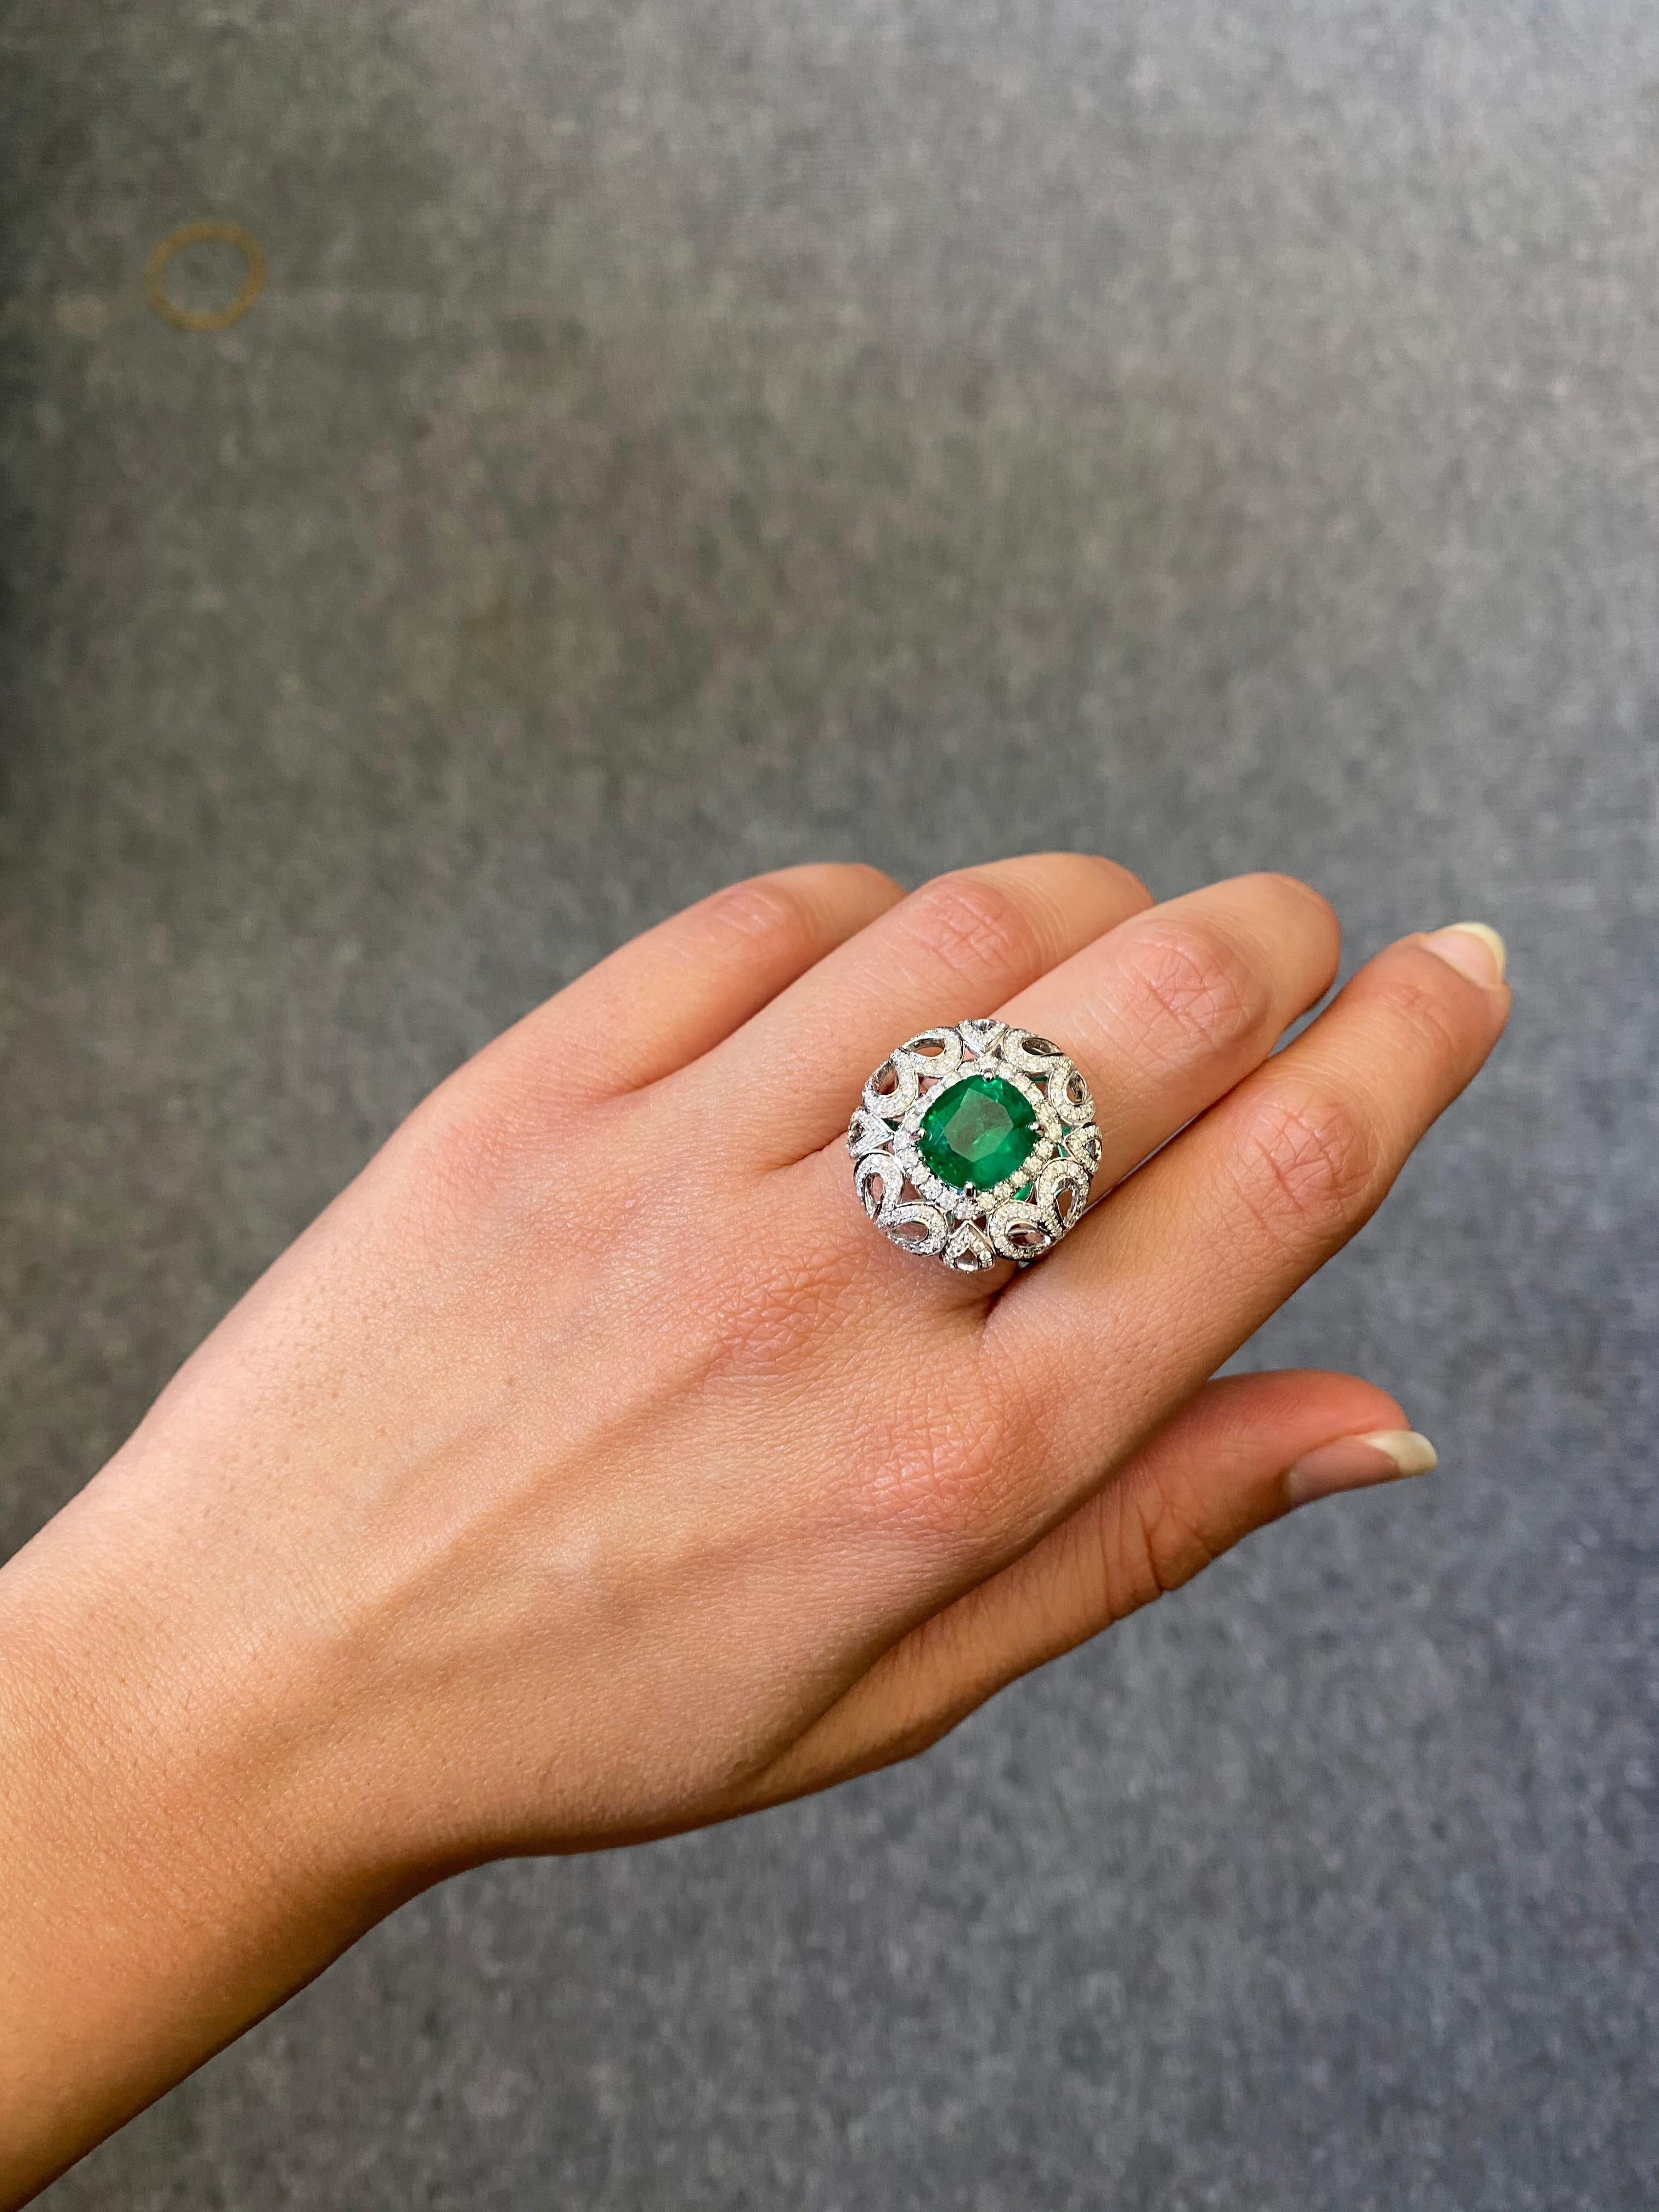 A unique 3.24 carat Zambian Emerald Ring with Diamonds, all set in 18K white gold. The stone is transparent, without any treatment/dye, very few visibile natural inclusions. The pictures depict the actual colour/quality of the centre stone.